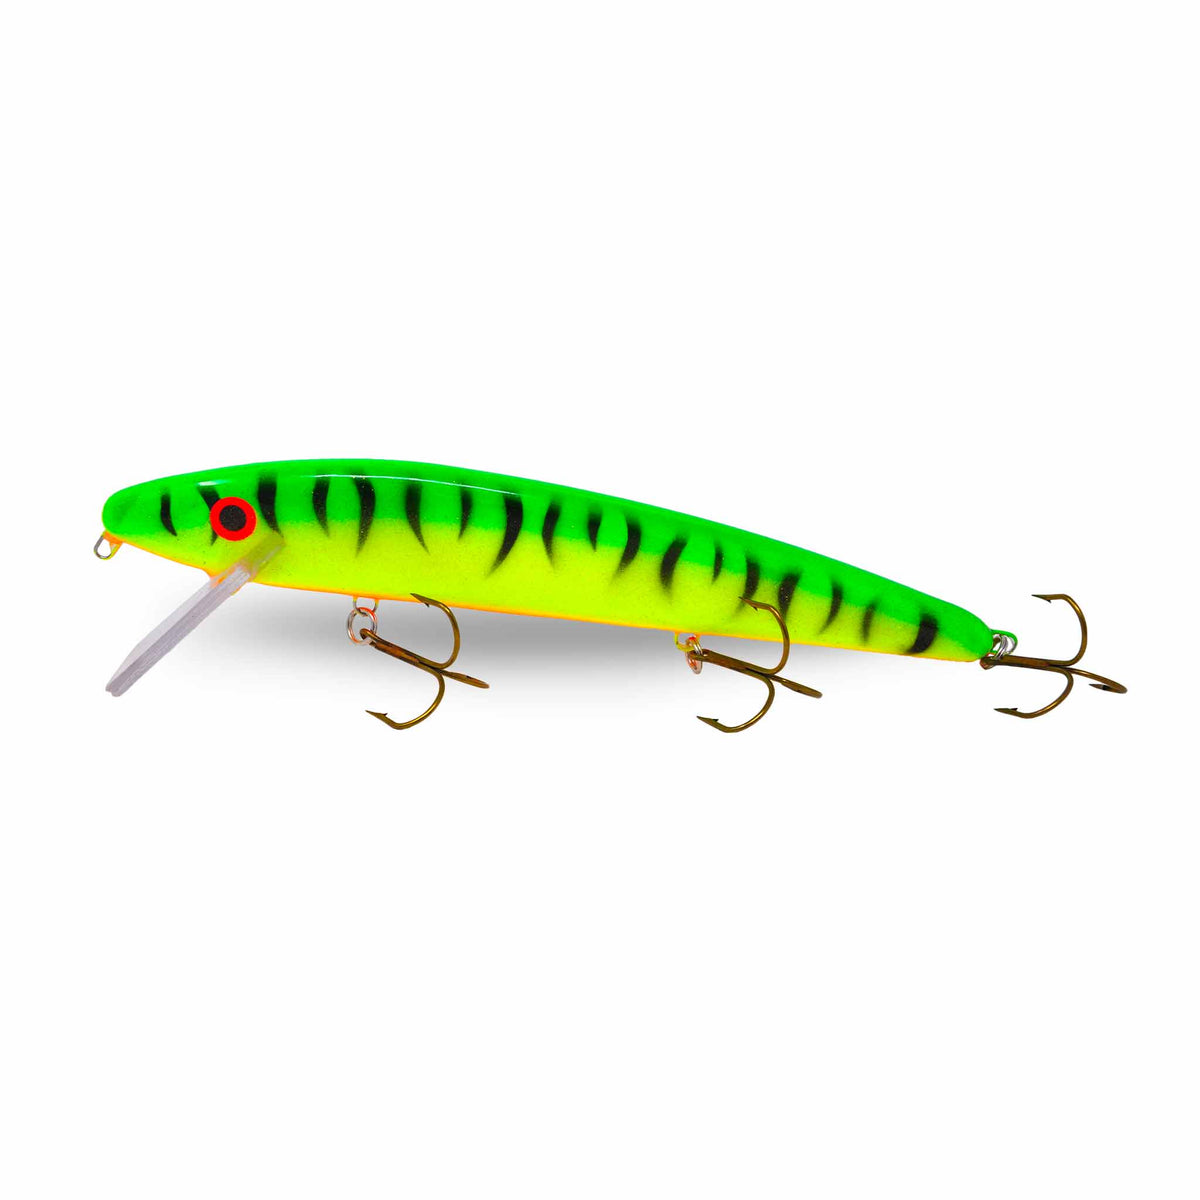 Drifter Tackle Believer Jointed 10 Crankbait